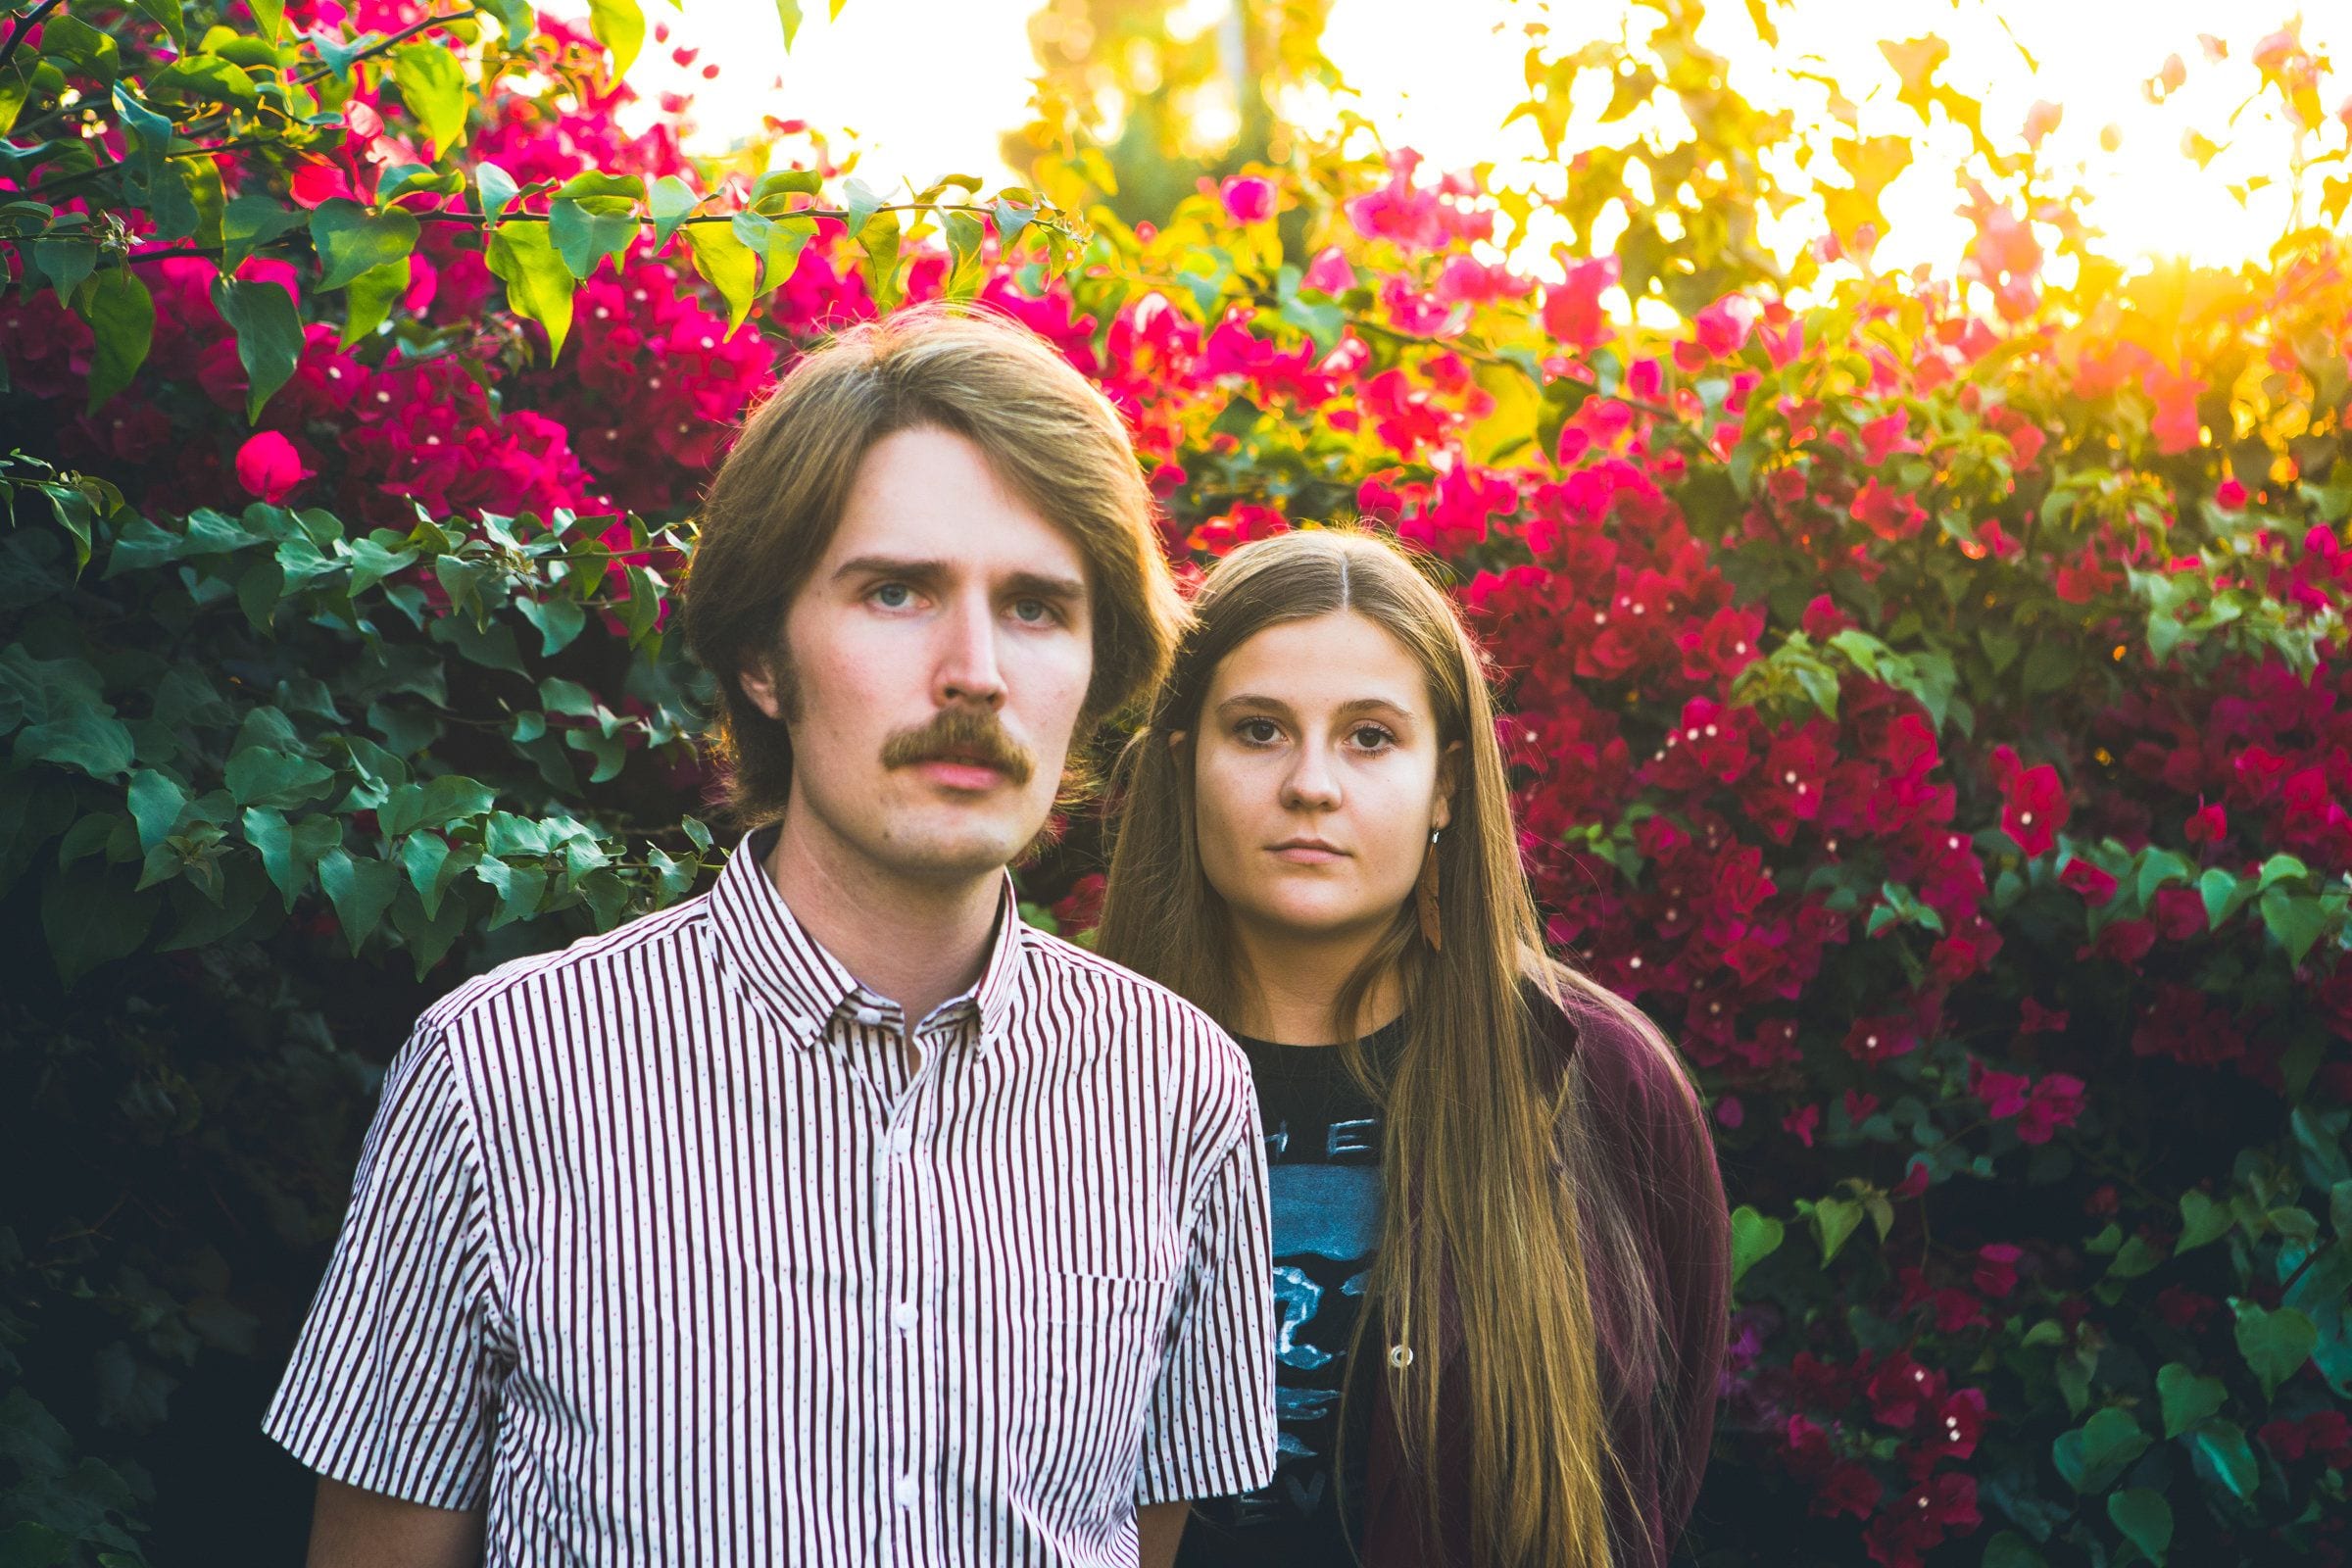 Kacy & Clayton Capture Loneliness, Desolation on “High Holiday” (premiere + interview)